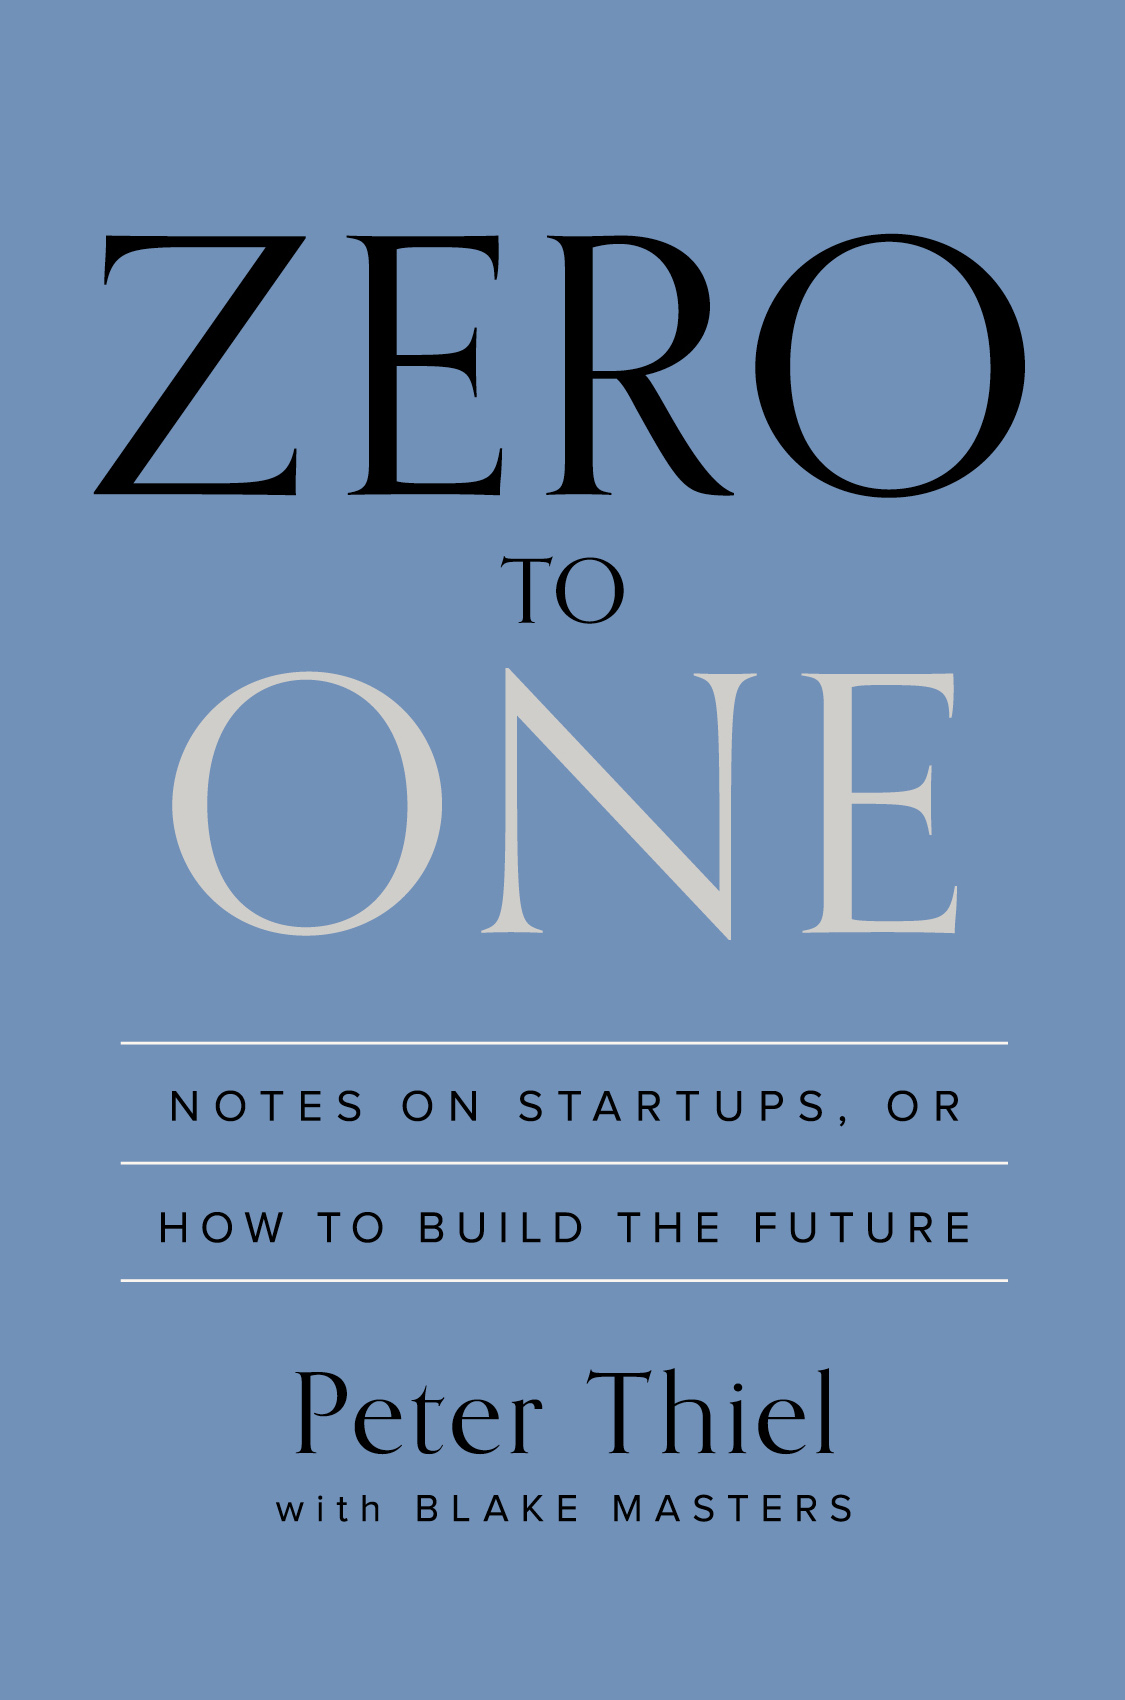 ZERO TO ONE, BY PETER THIEL, Book Summary